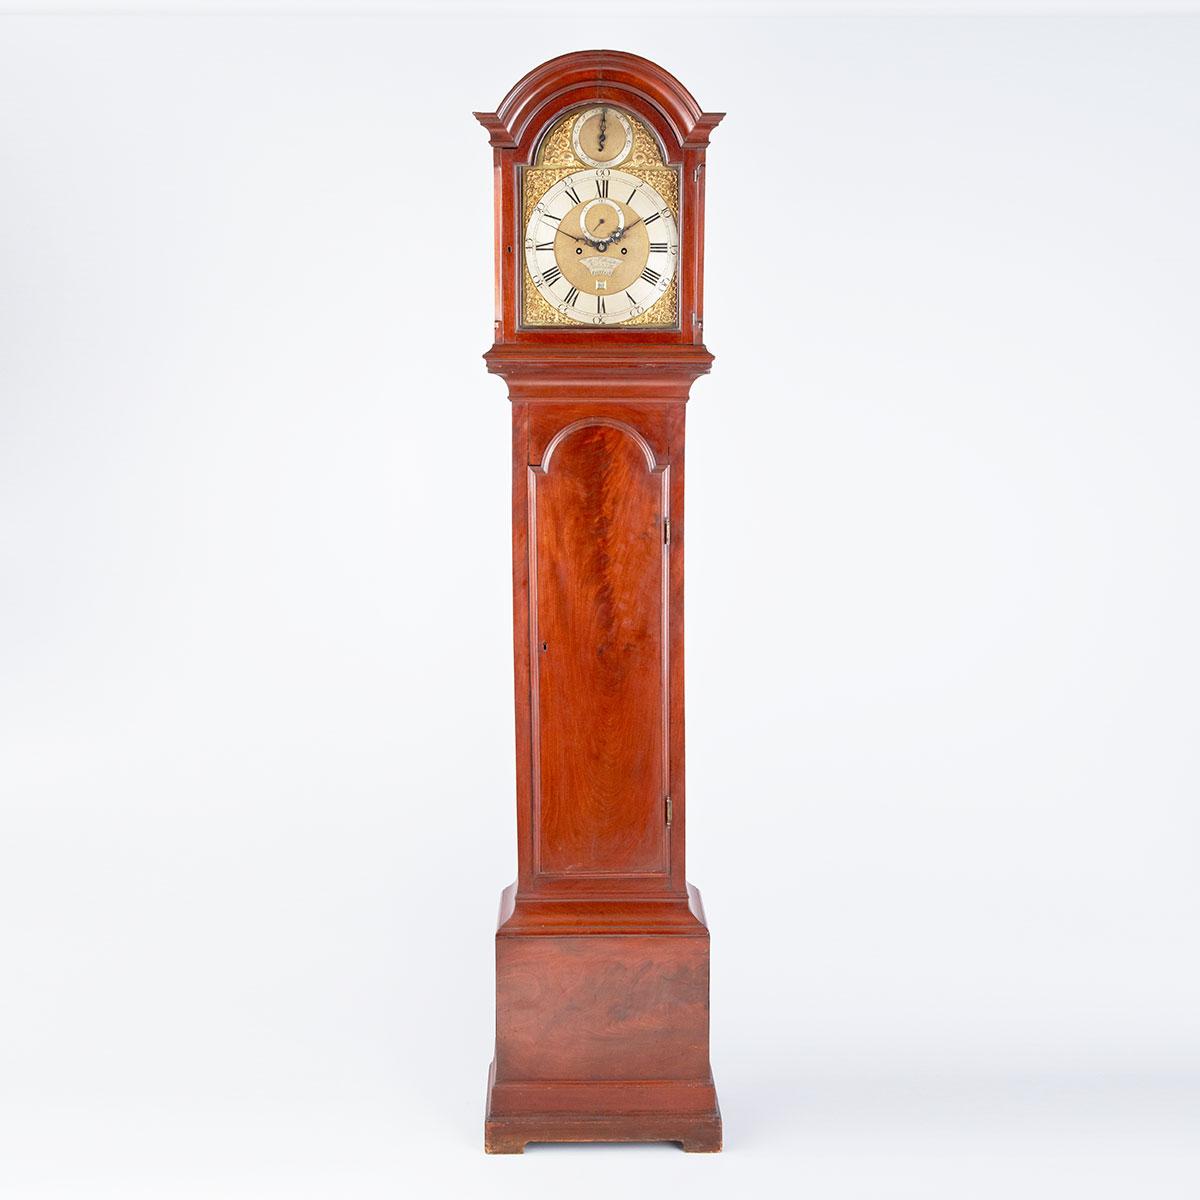 George III Flame Mahogany Tall Case Clock, William Webster, London, c.1765